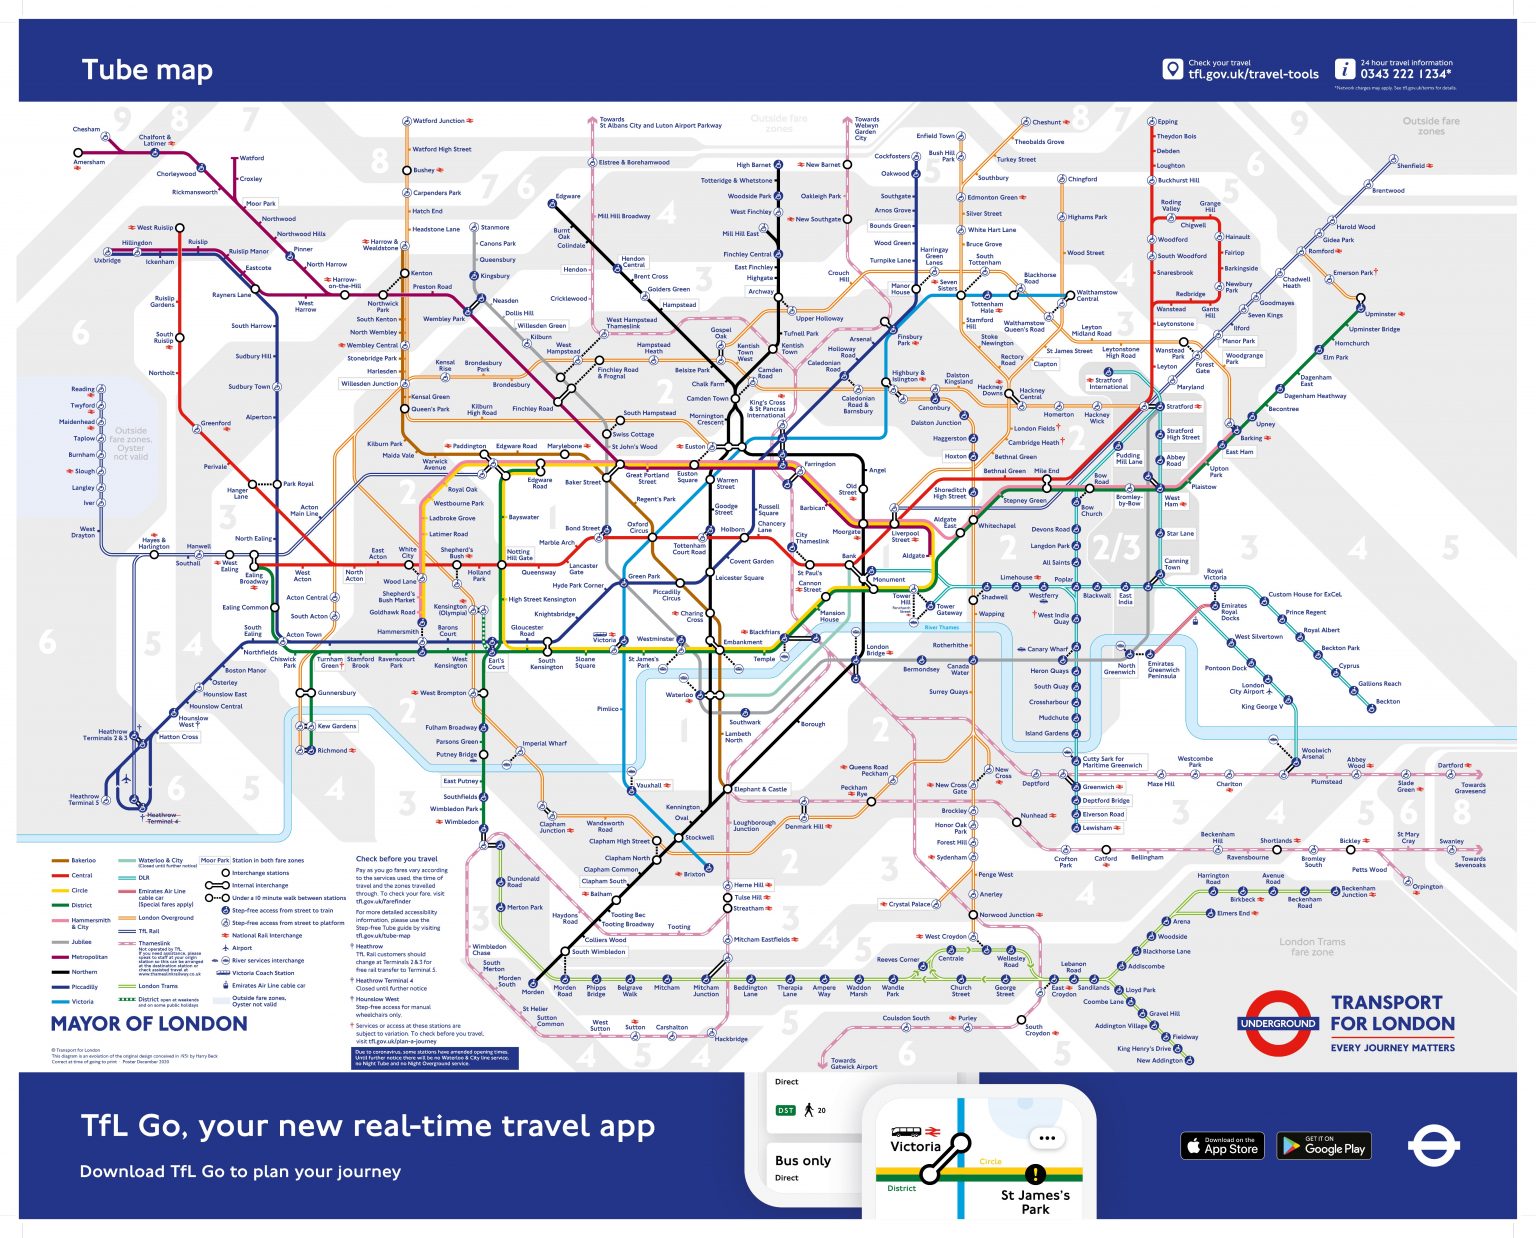 Thameslink to be added to London’s Tube Map RailStaff